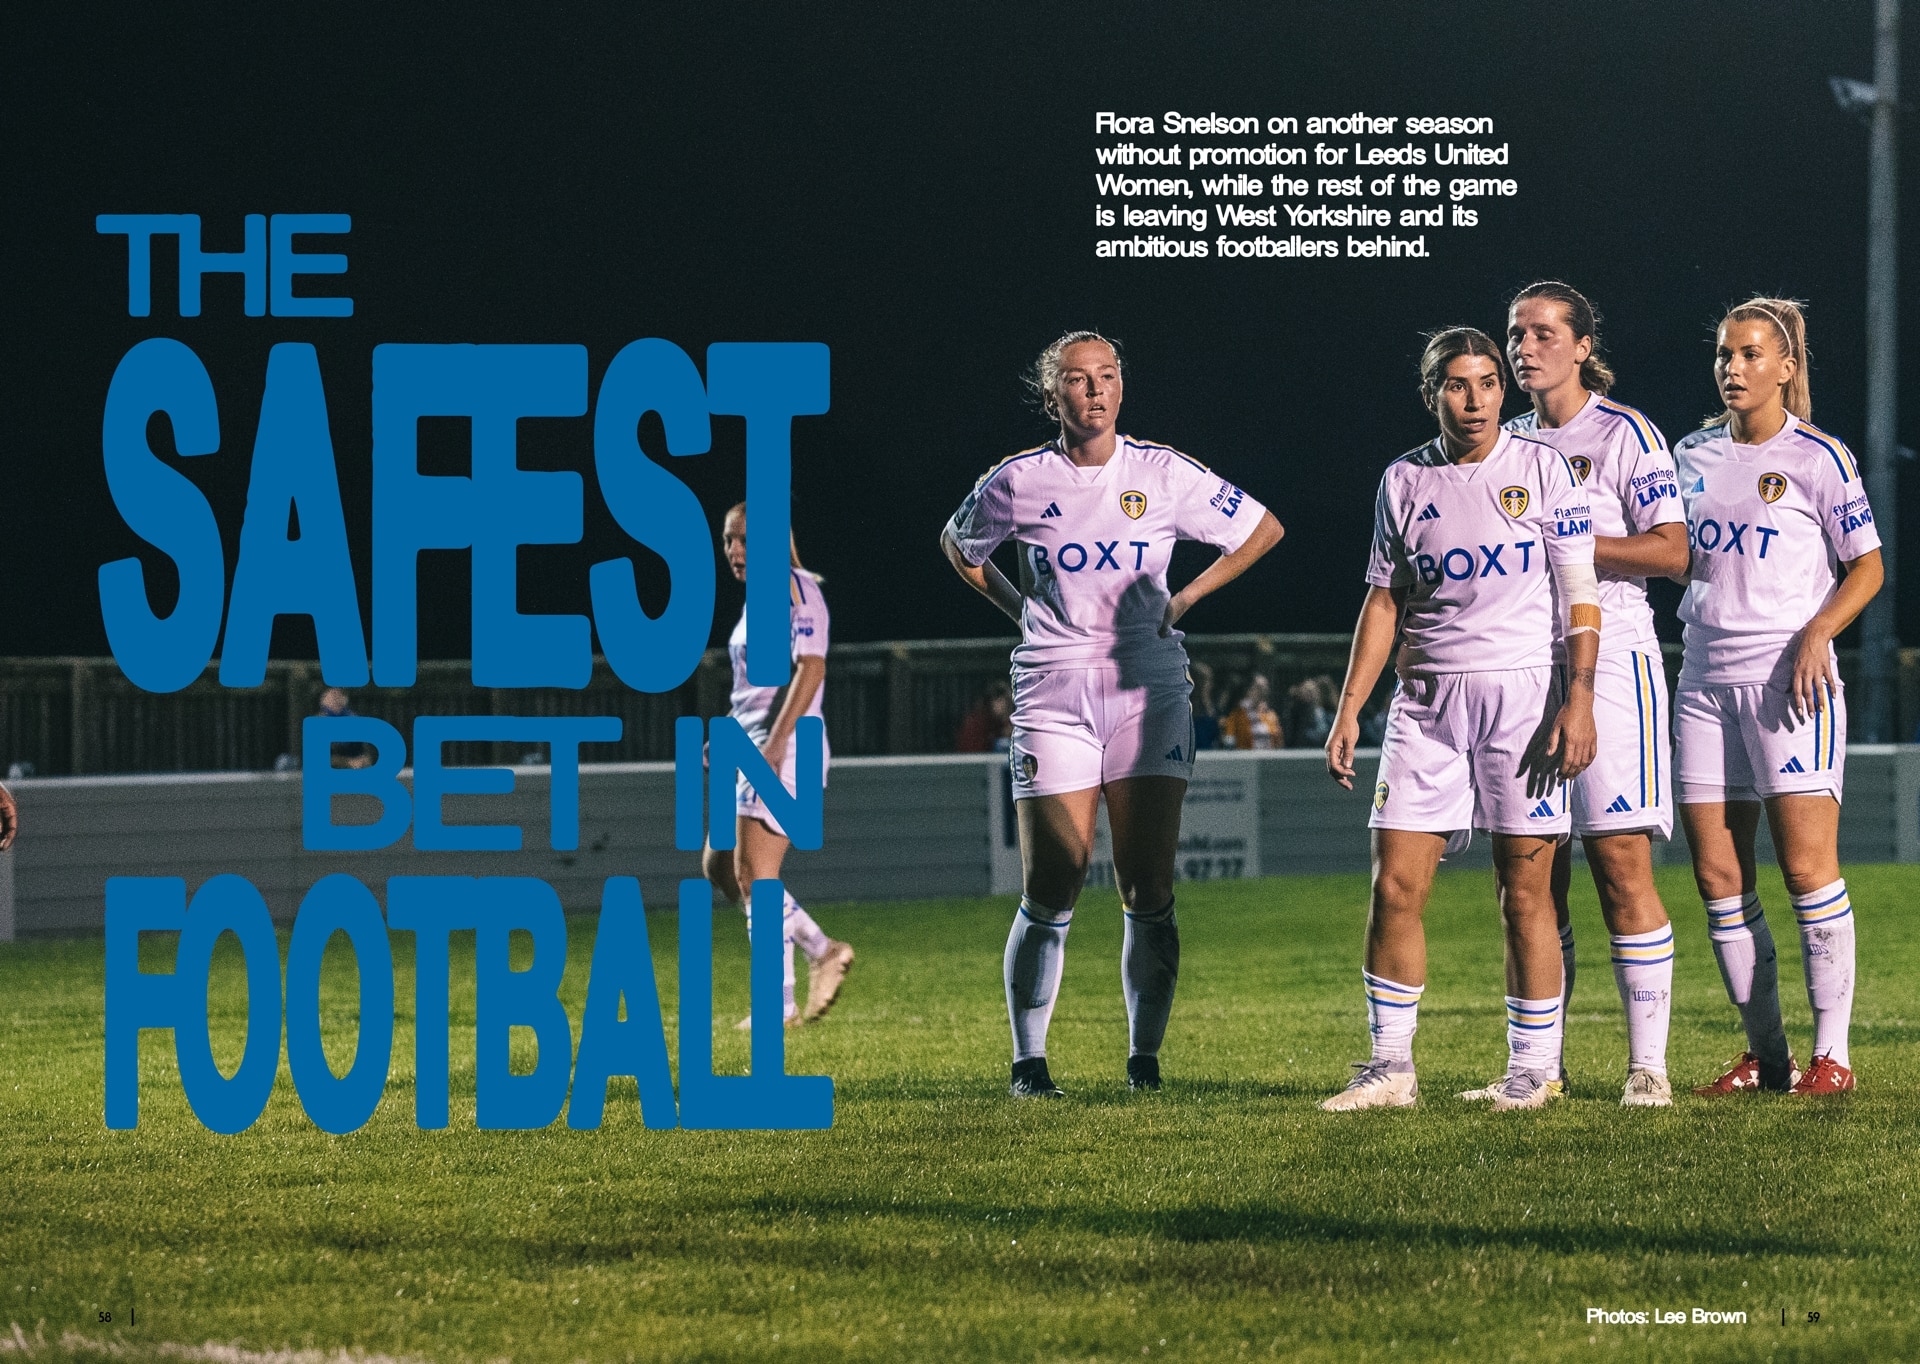 A double page spread from inside the TSB Summer Special 2024, showing a photo of players from Leeds United Women as part of Flora Snelson's review of their season